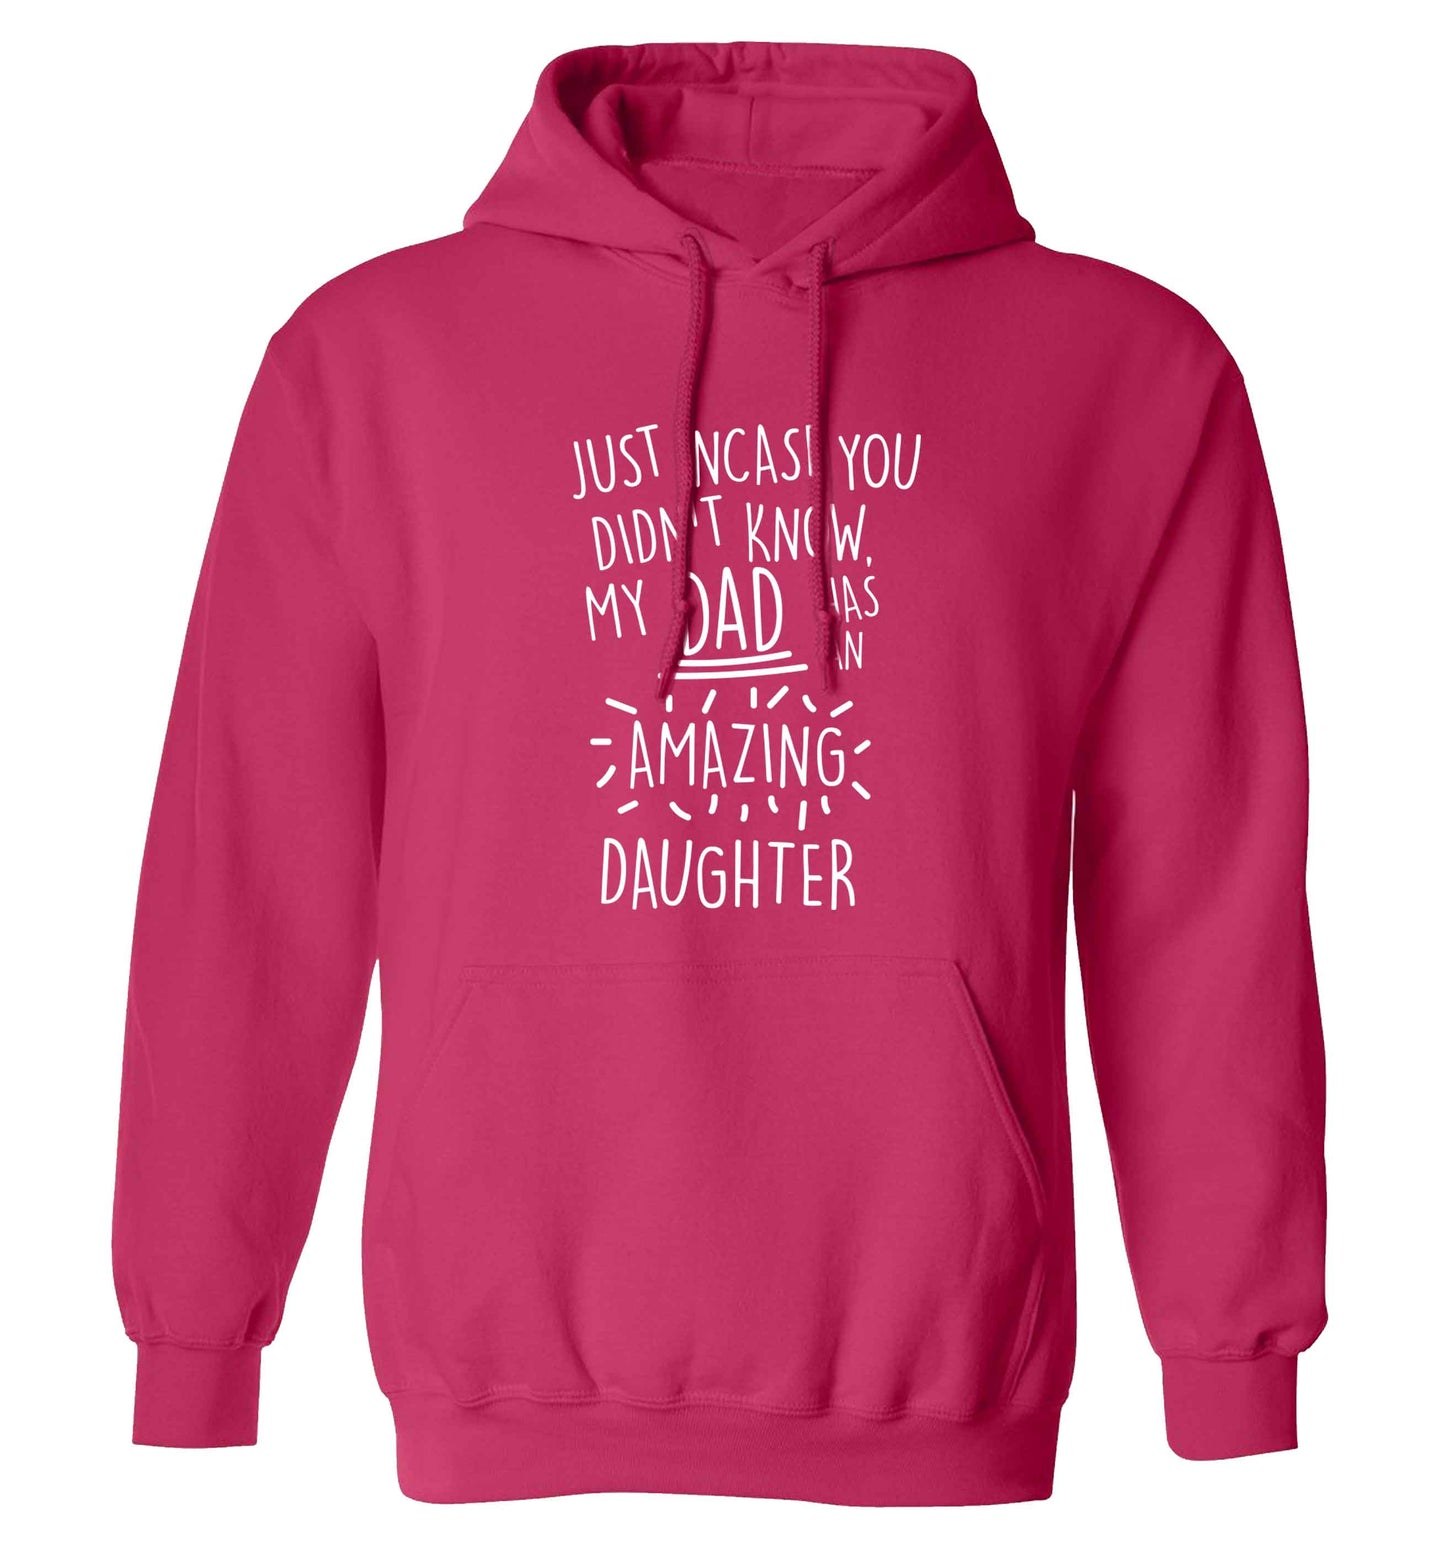 Just incase you didn't know my dad has an amazing daughter adults unisex pink hoodie 2XL